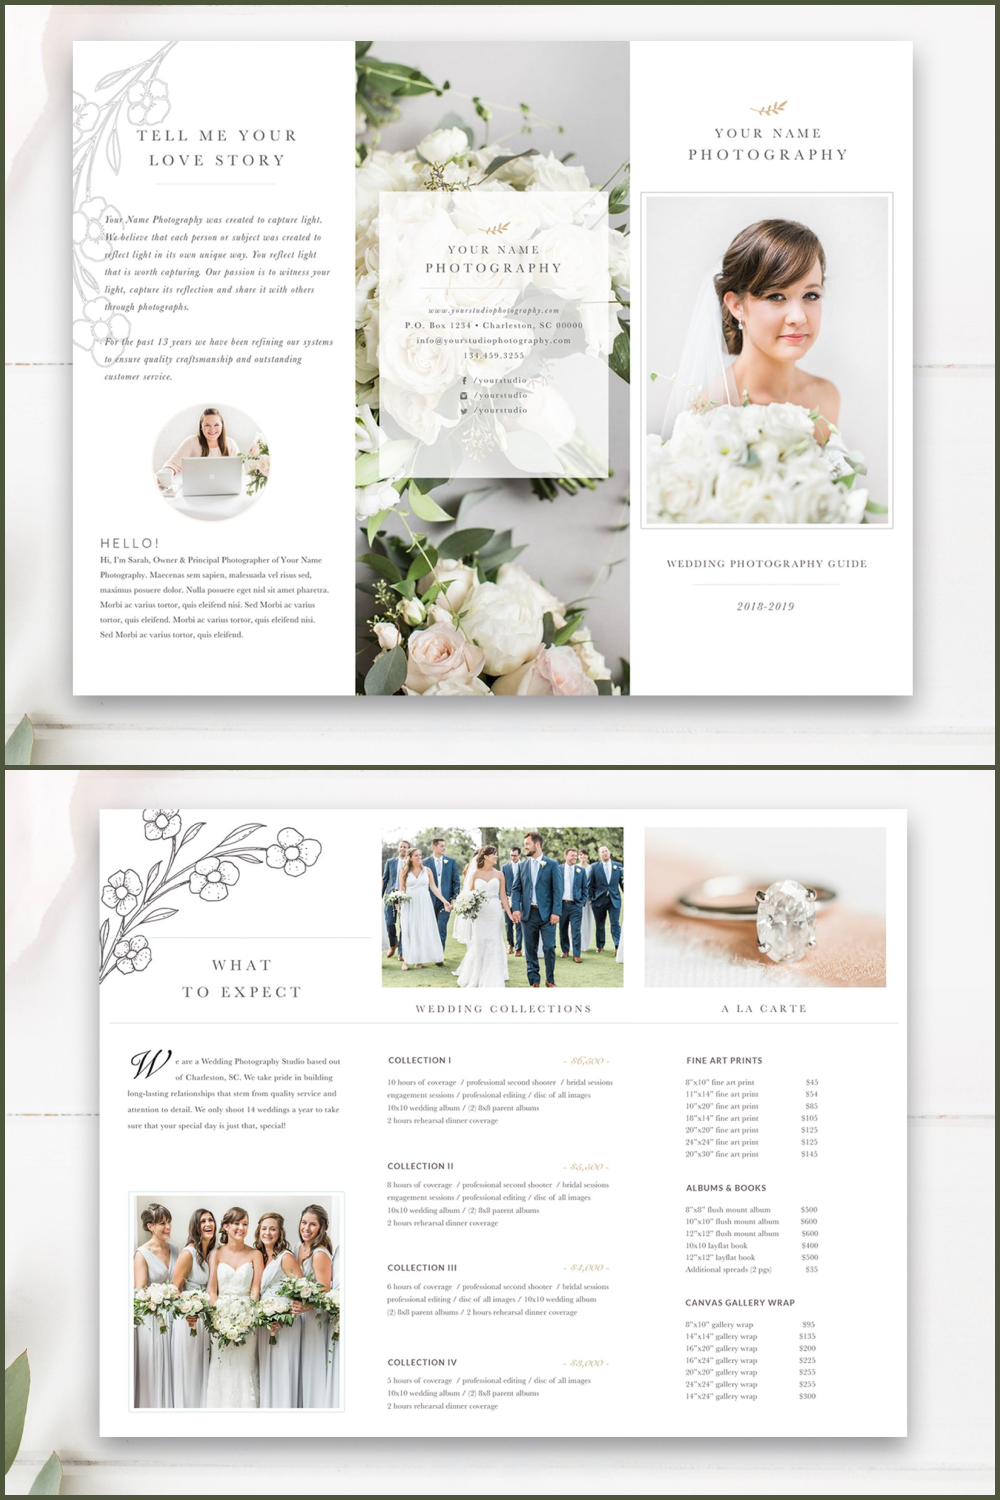 Wedding photography trifold of pinterest.